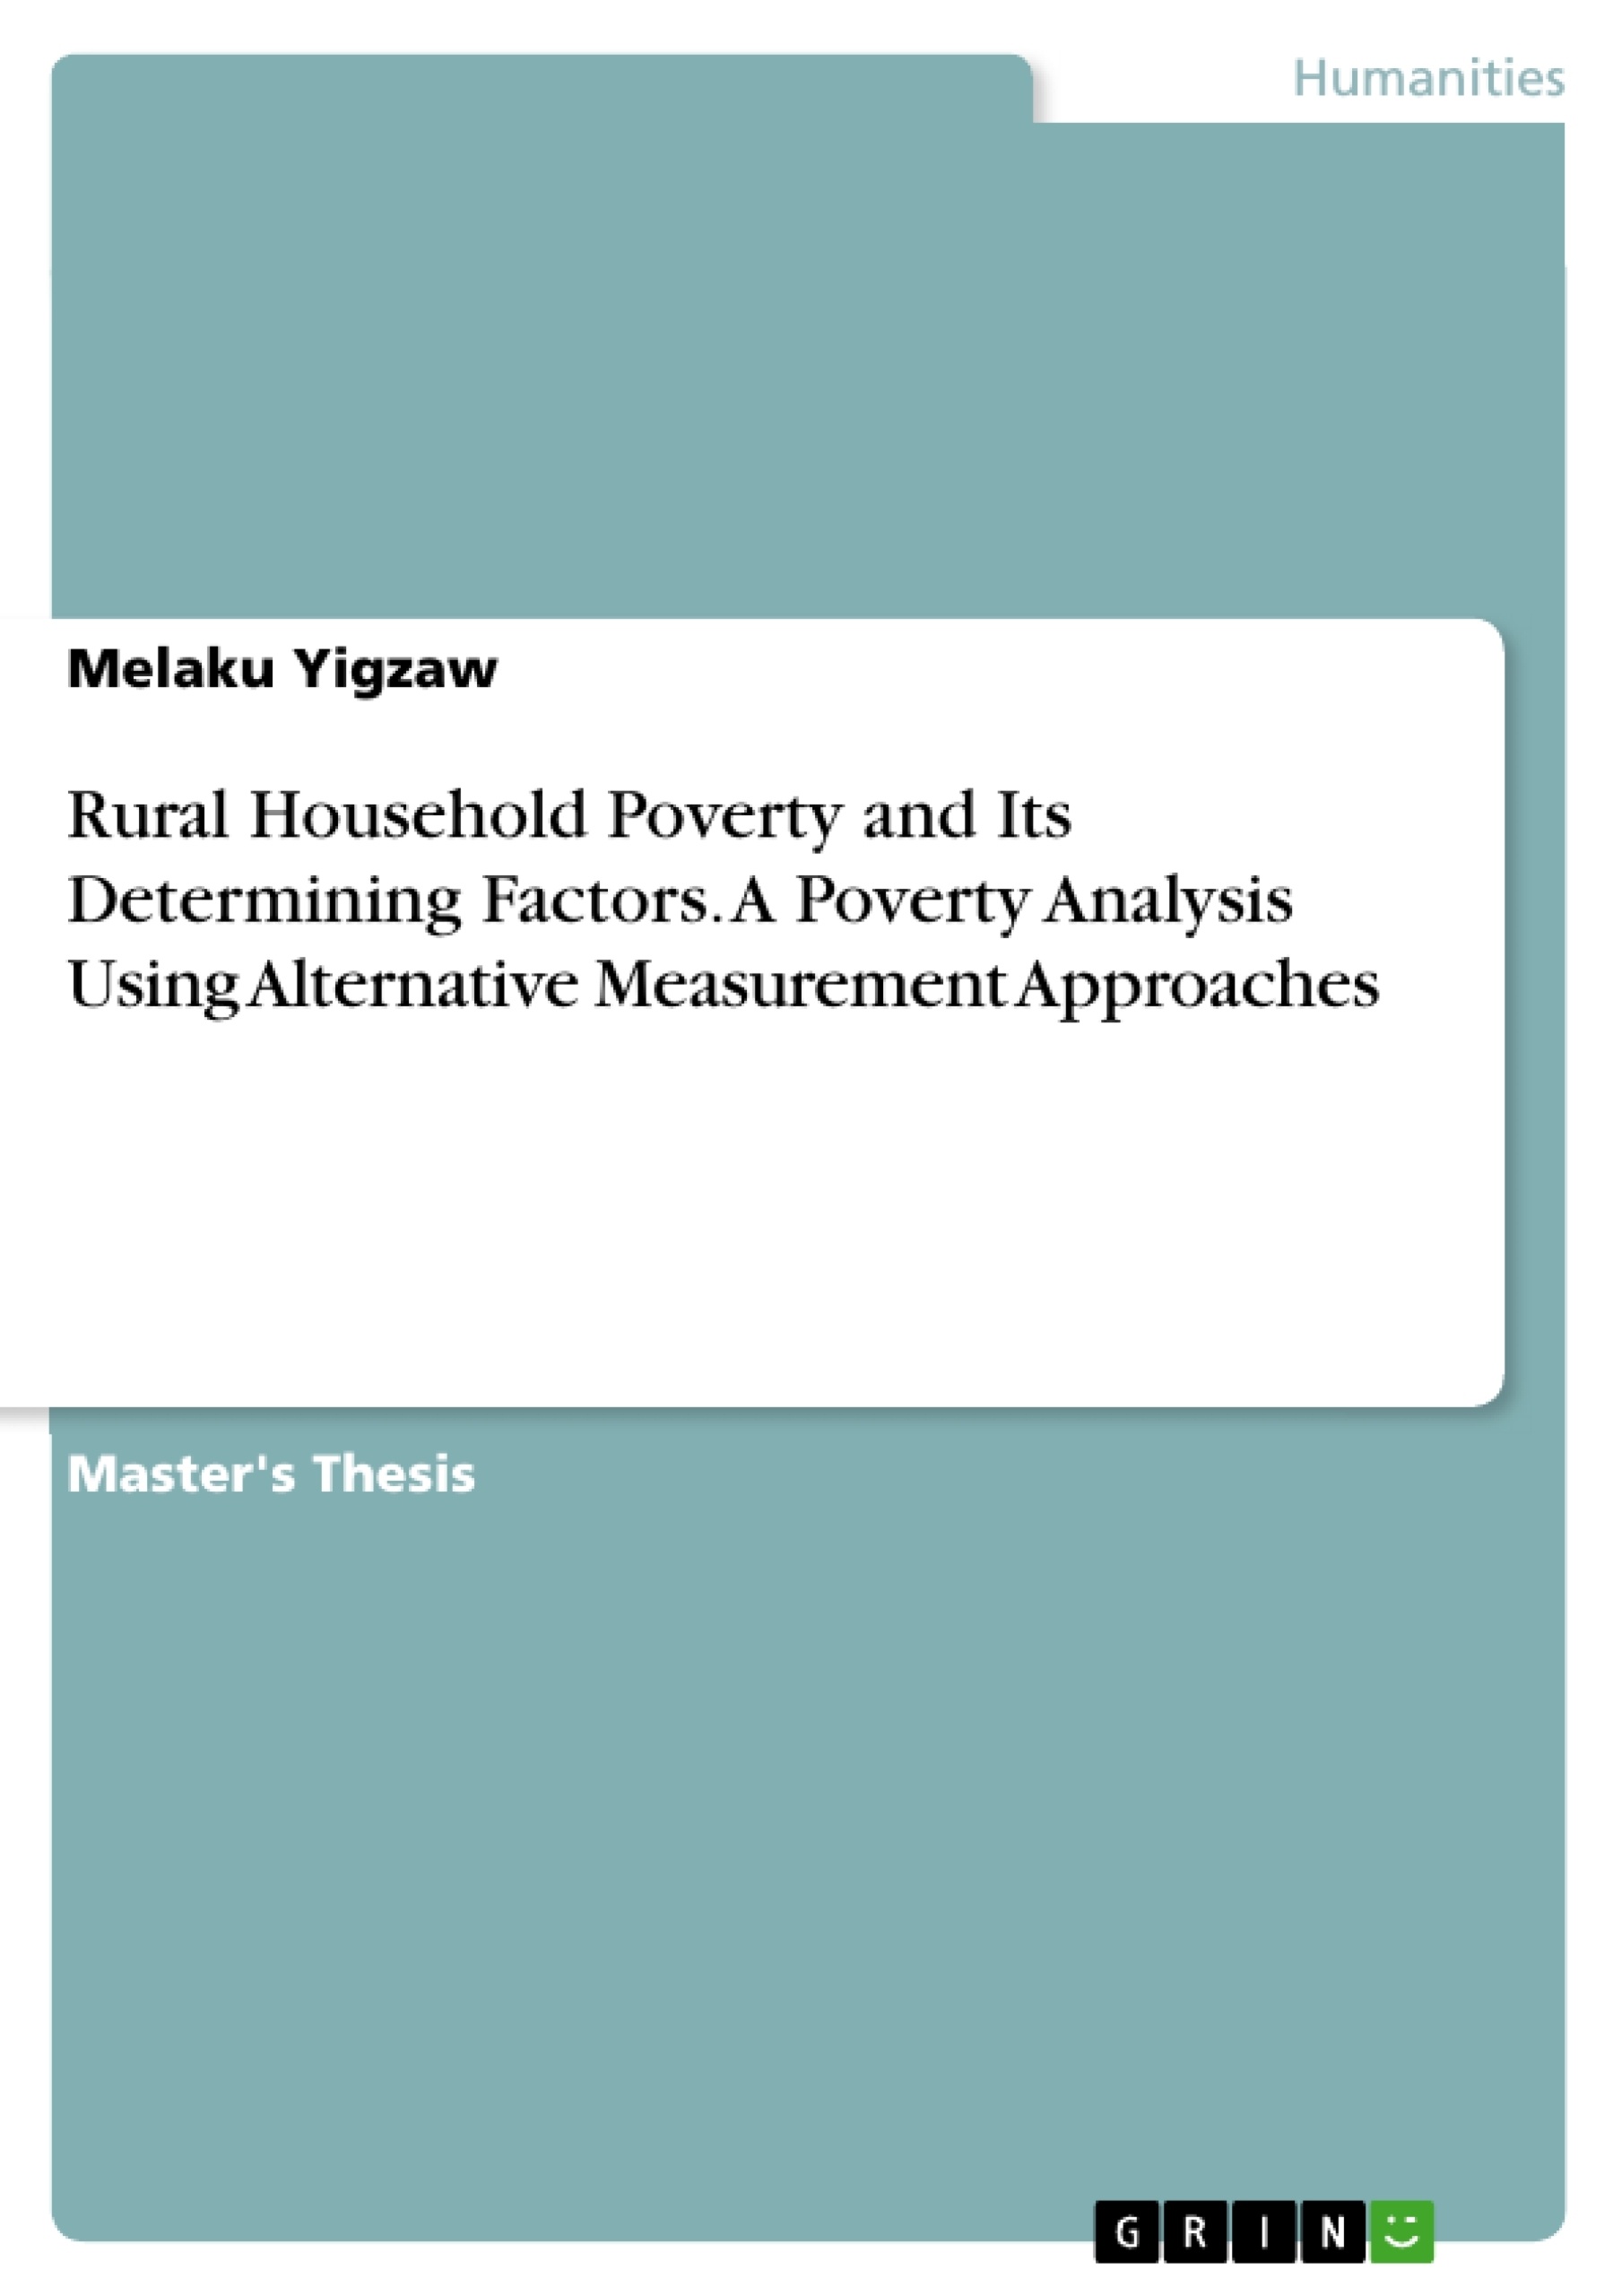 Title: Rural Household Poverty and Its Determining Factors. A Poverty Analysis Using Alternative Measurement Approaches